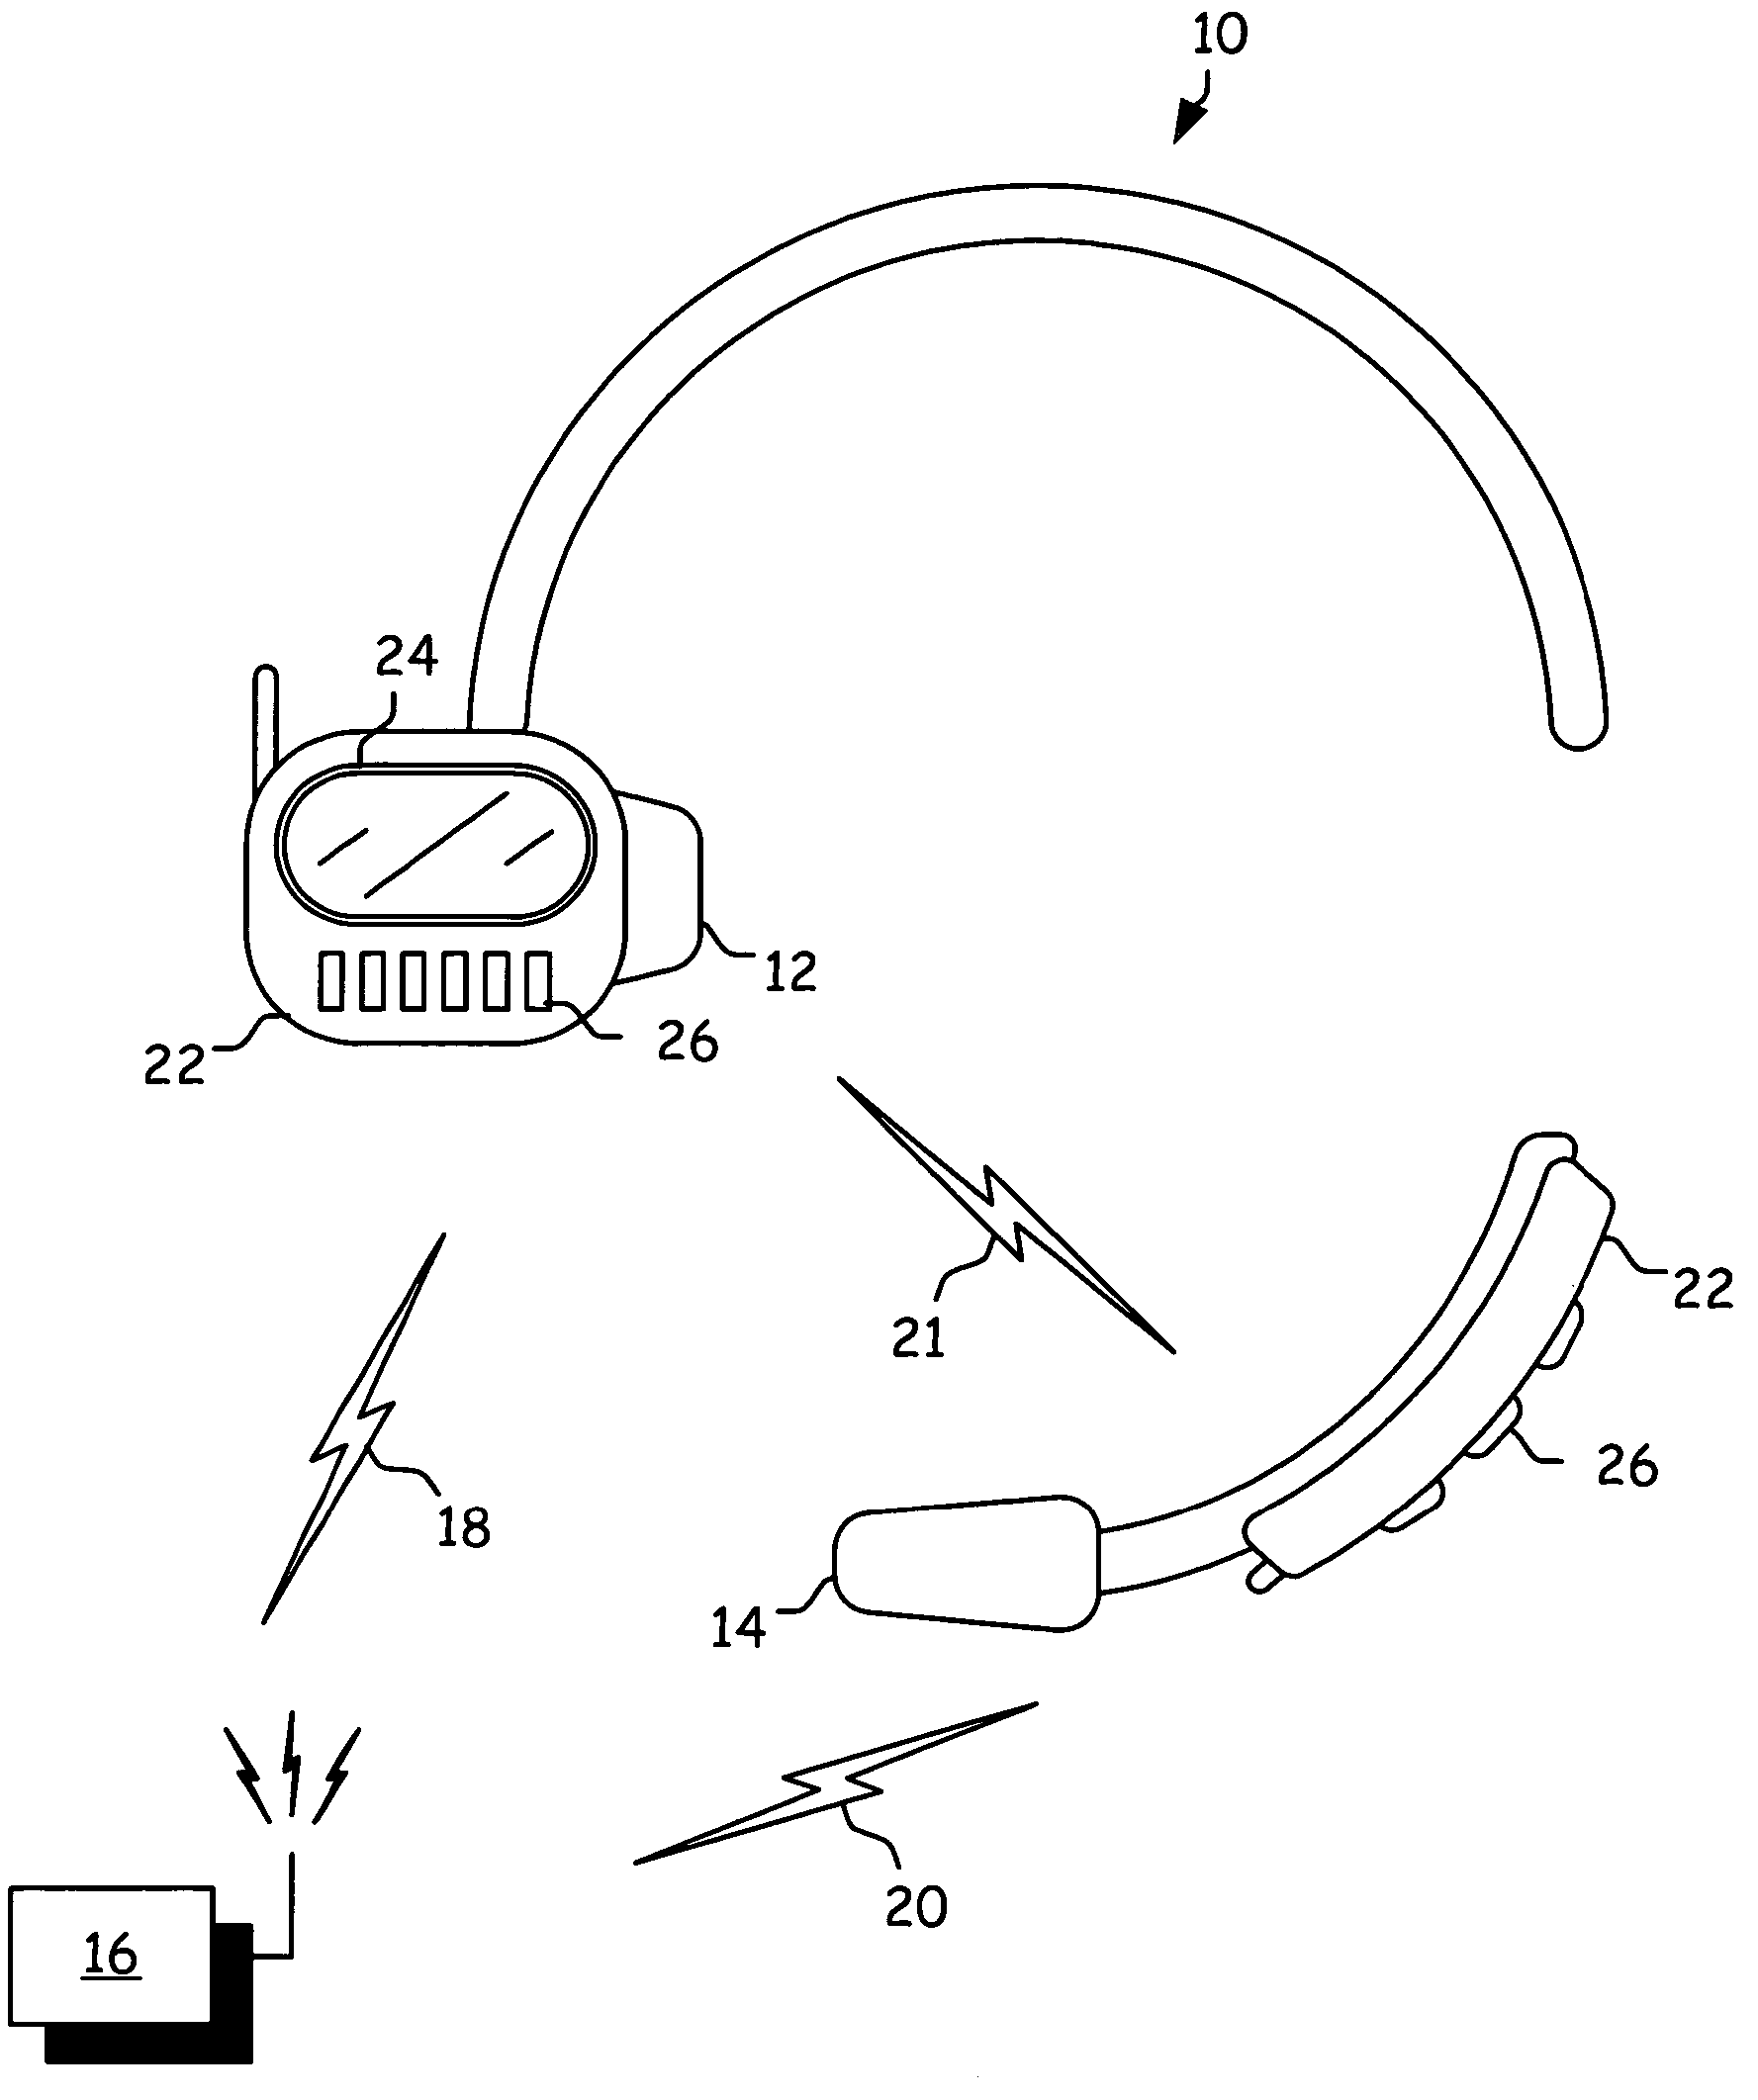 Pairing modular wireless earpiece/microphone (HEADSET) to a serviced base portion and subsequent access thereto